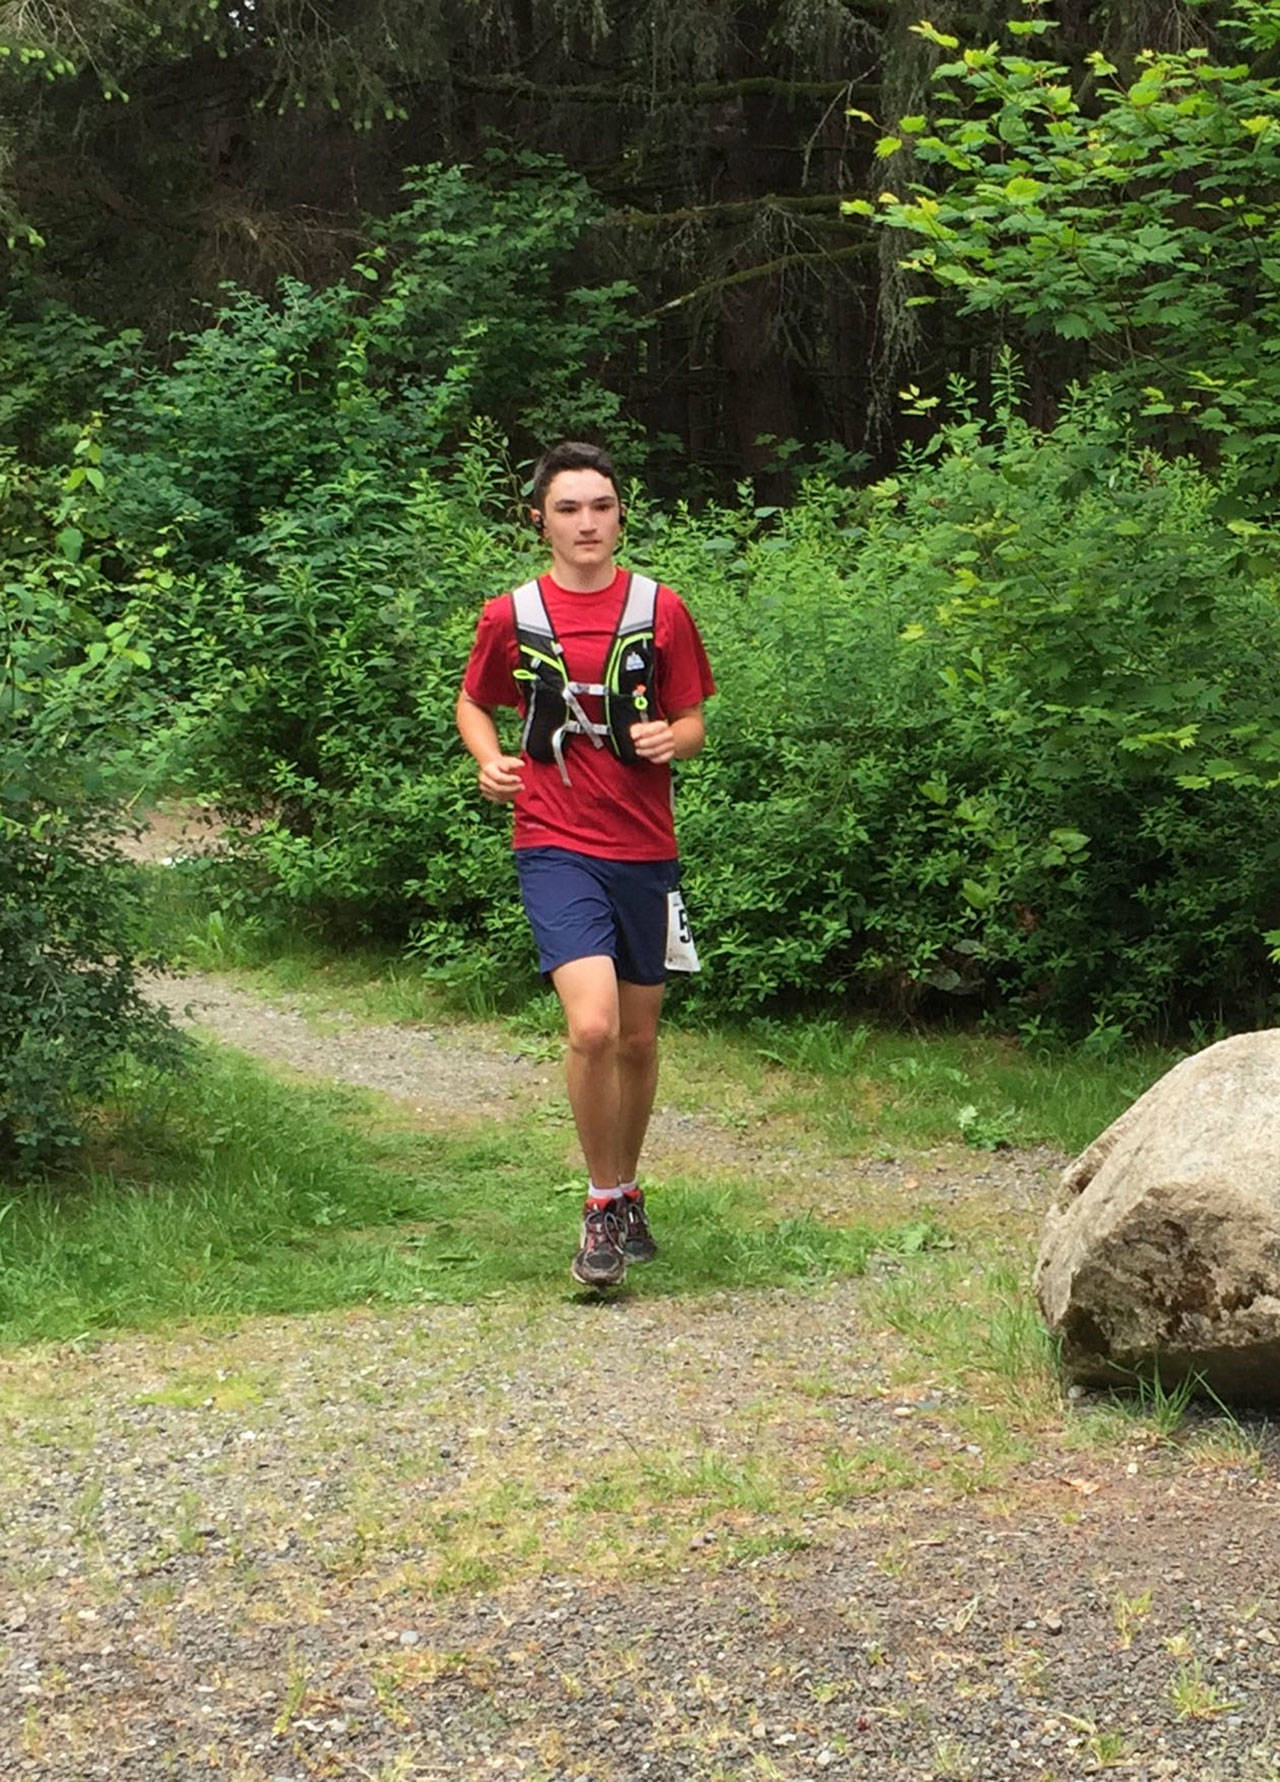 Islander and Vashon High School junior Sam Knight, 17, was the youngest participant in the Vashon Ultra 50K trail run on Saturday. He finished 27th of 41 competitors with a time of 6 hours and 28 minutes. (Laura Johnson Photo)